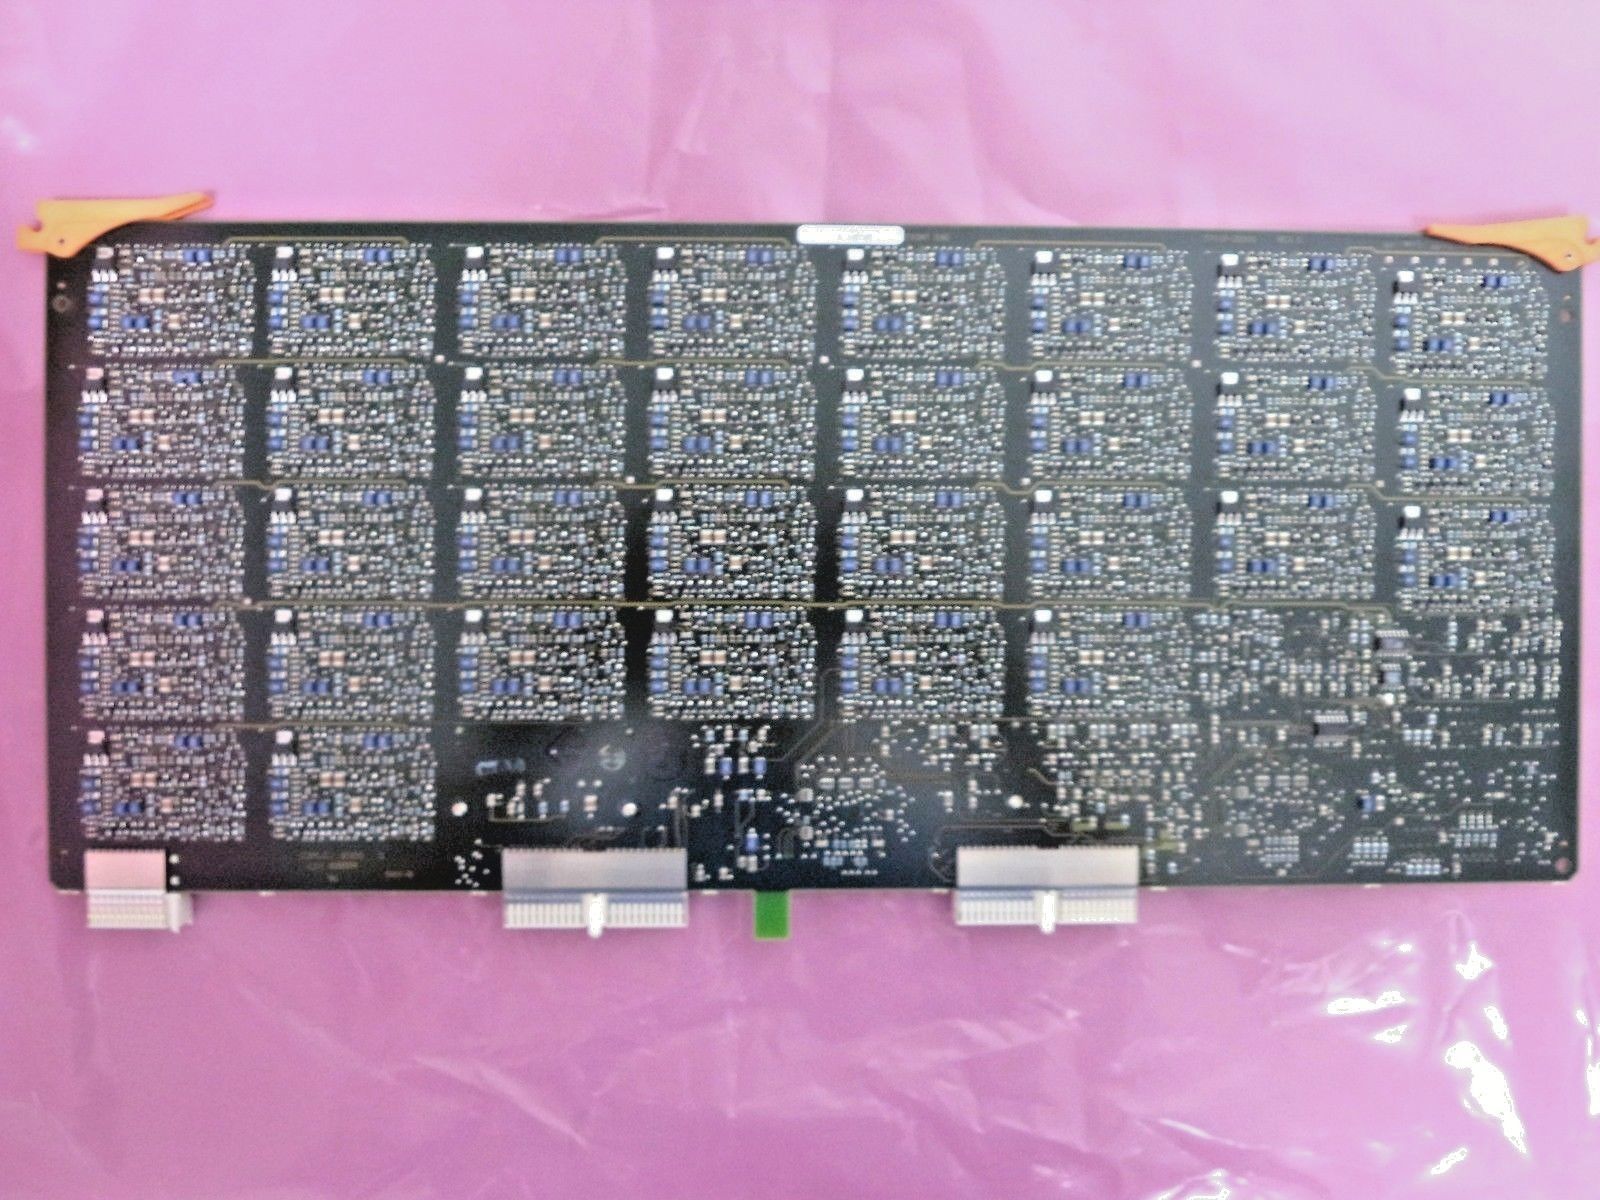 a close up of a computer board on a pink background